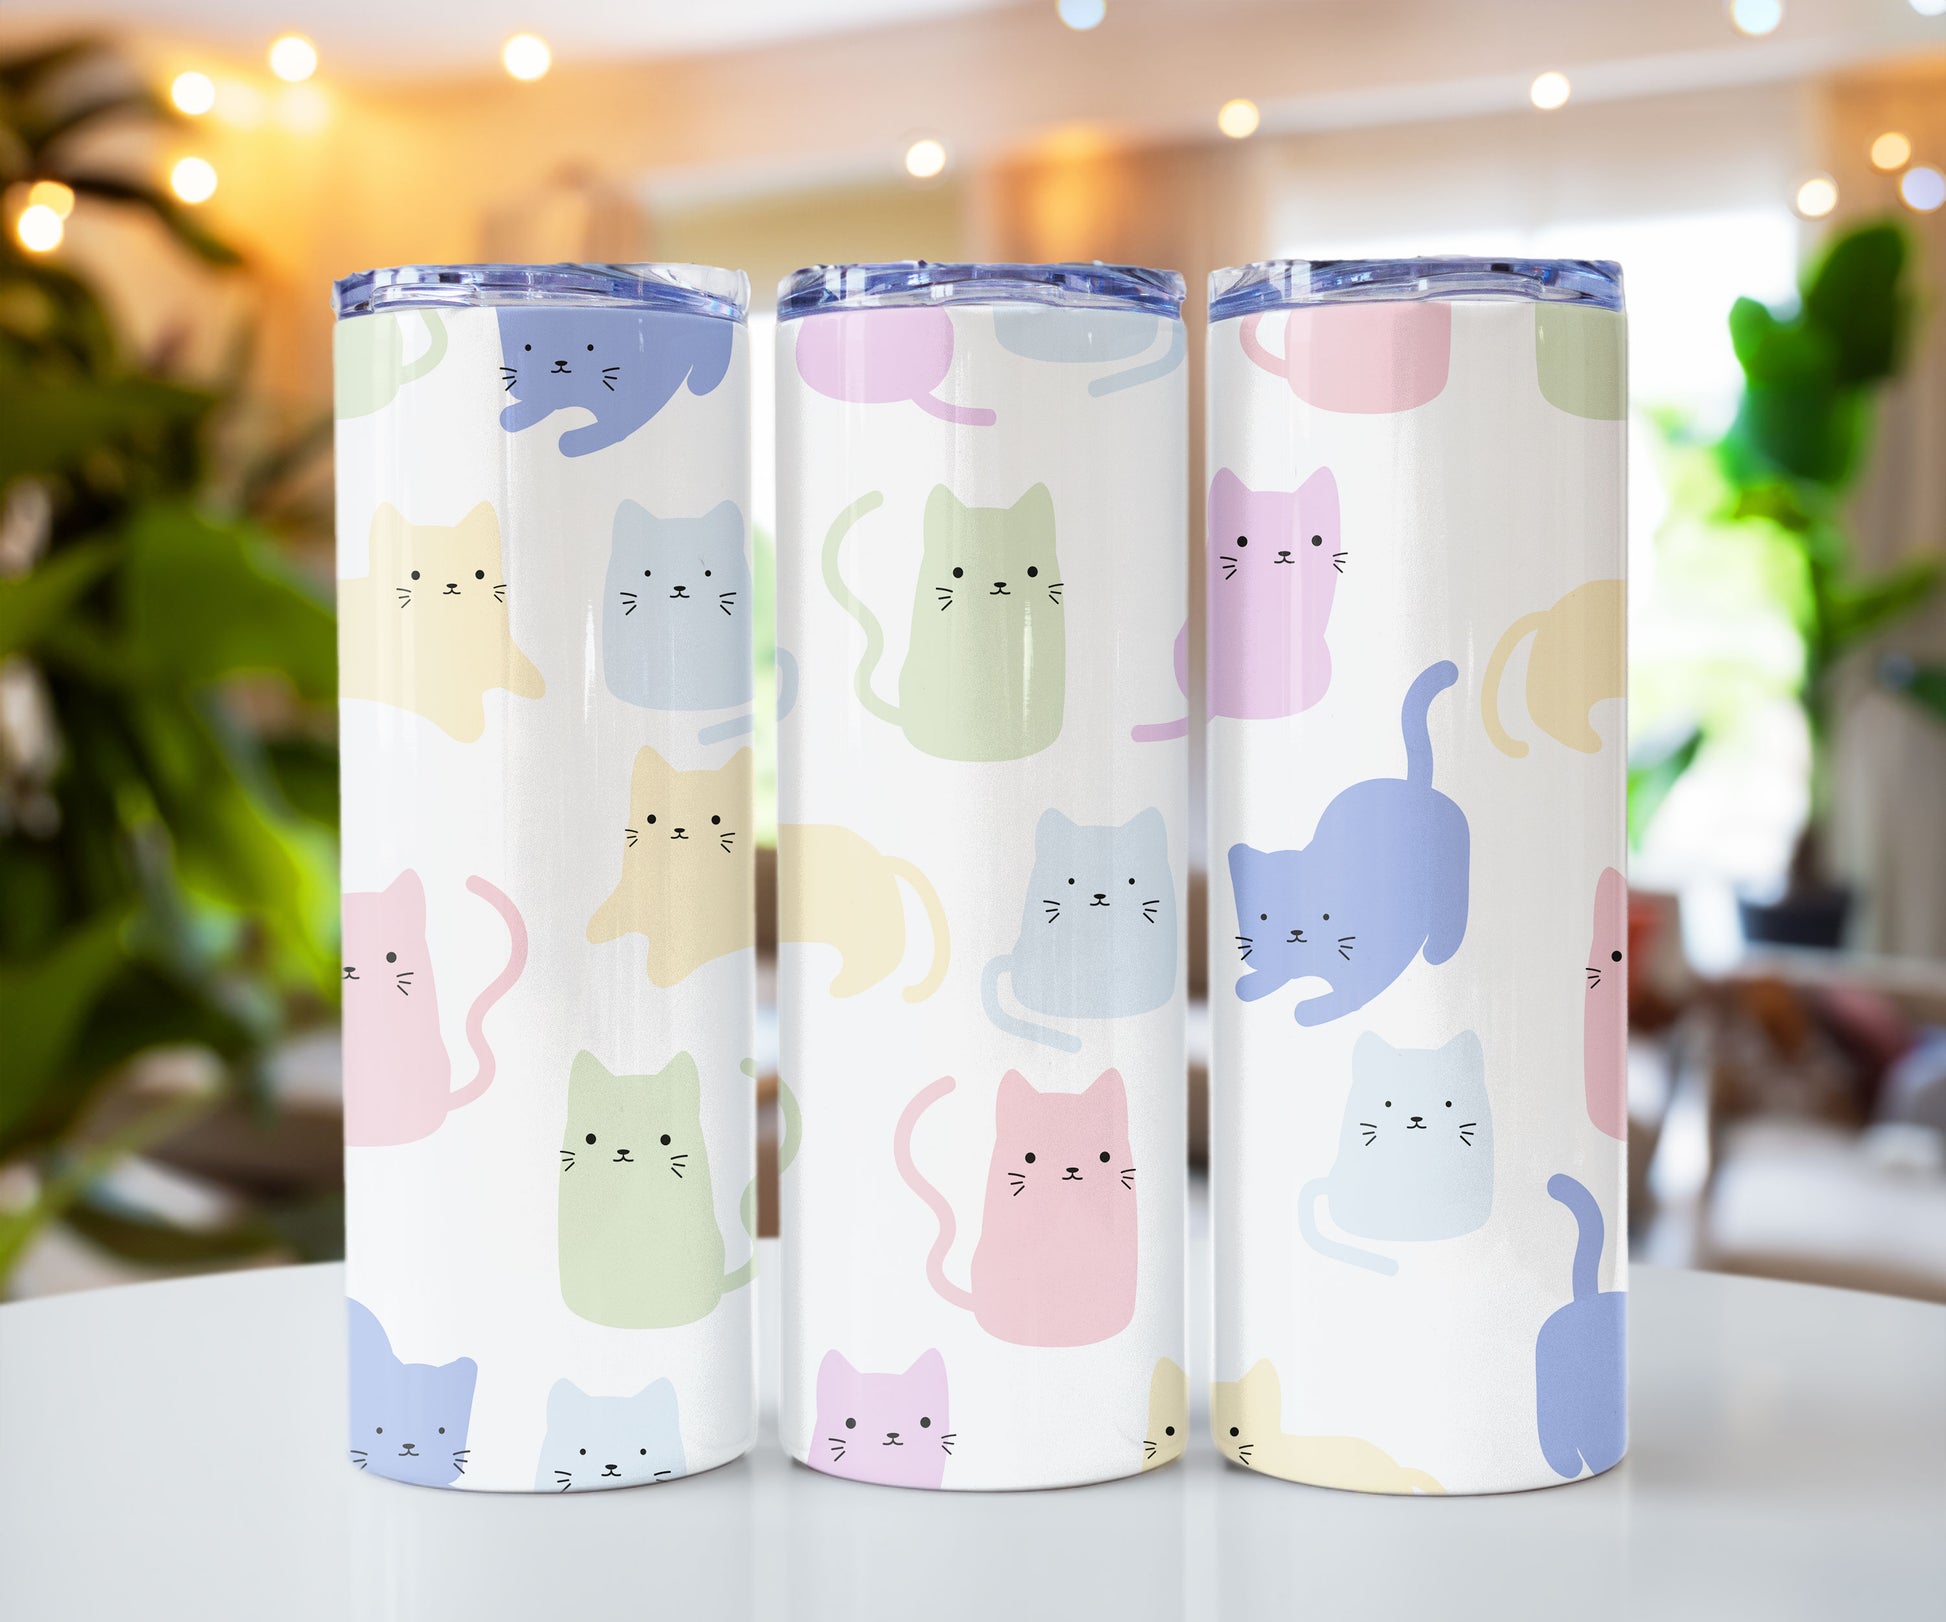 Meow Meow Stainless steel tumbler CedarHill Country Market